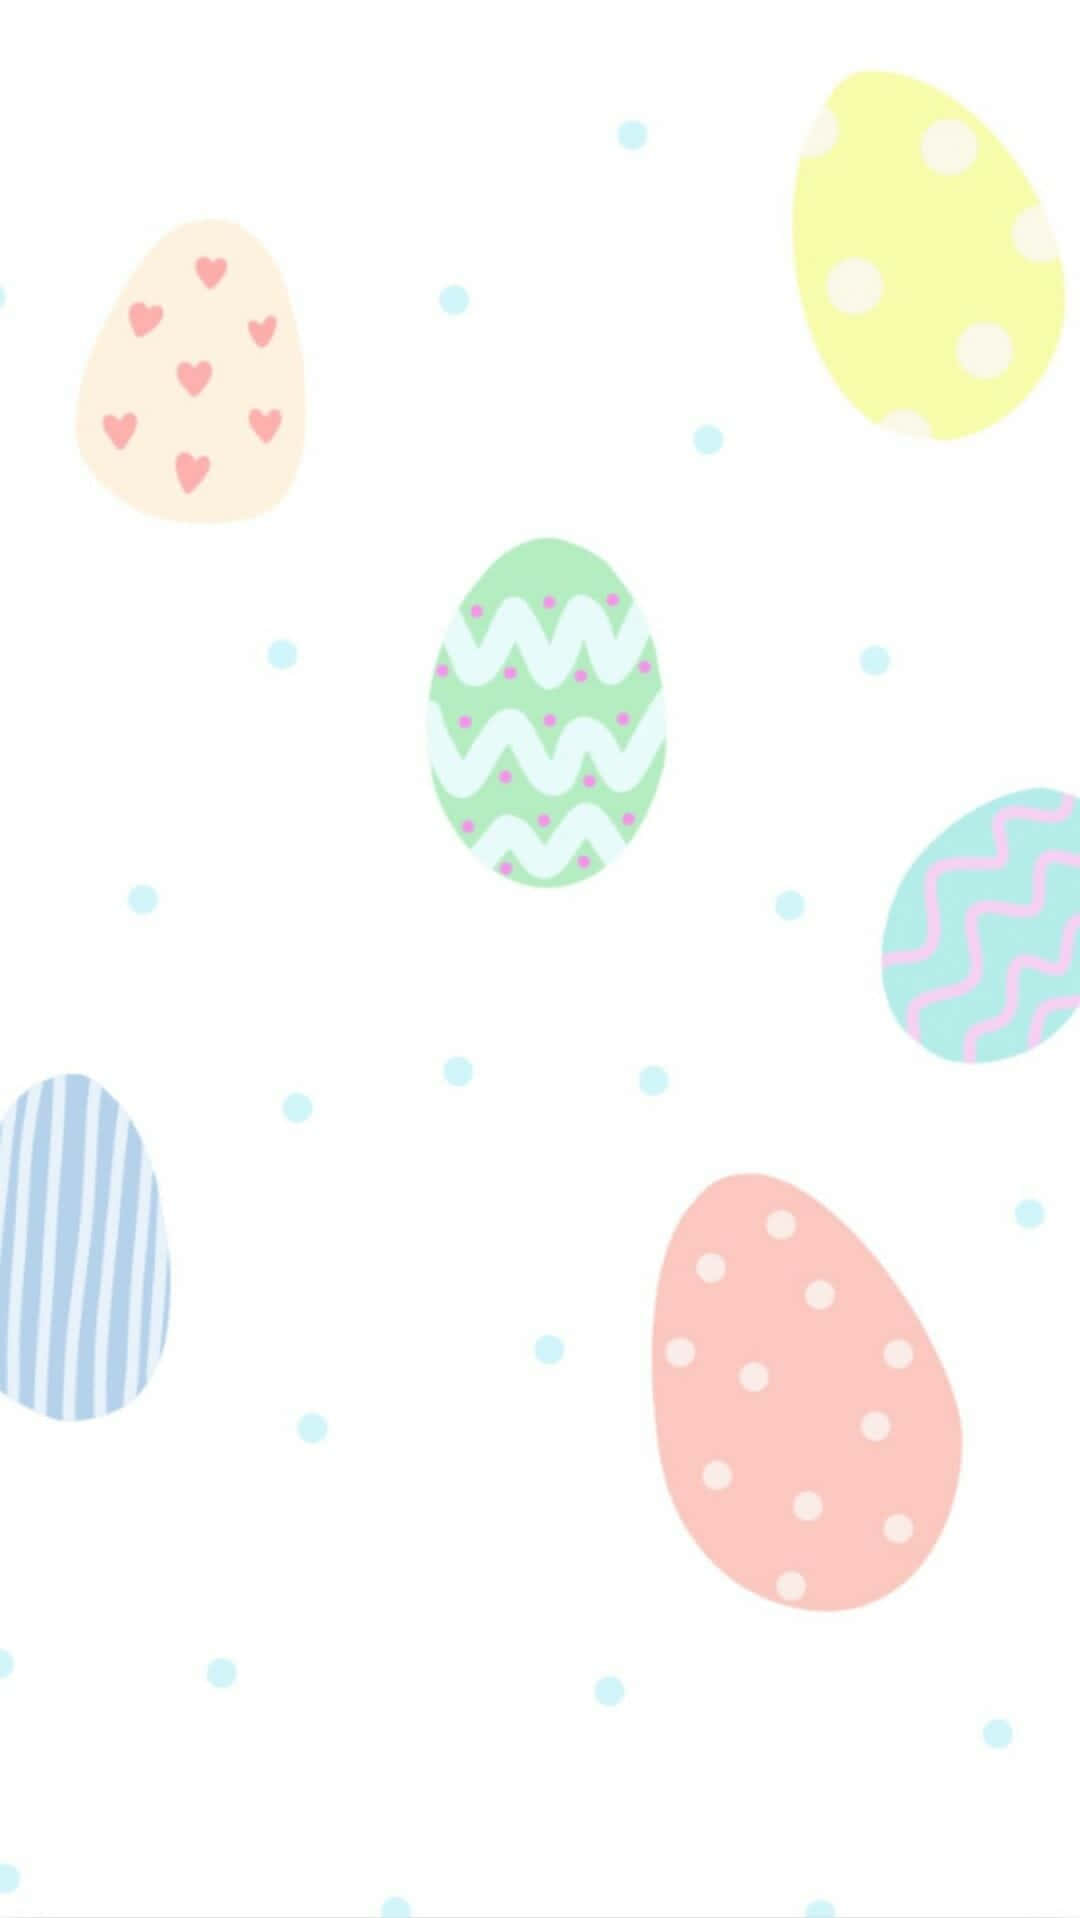 Celebrate Easter this year with this adorable bunny-inspired iphone design! Wallpaper